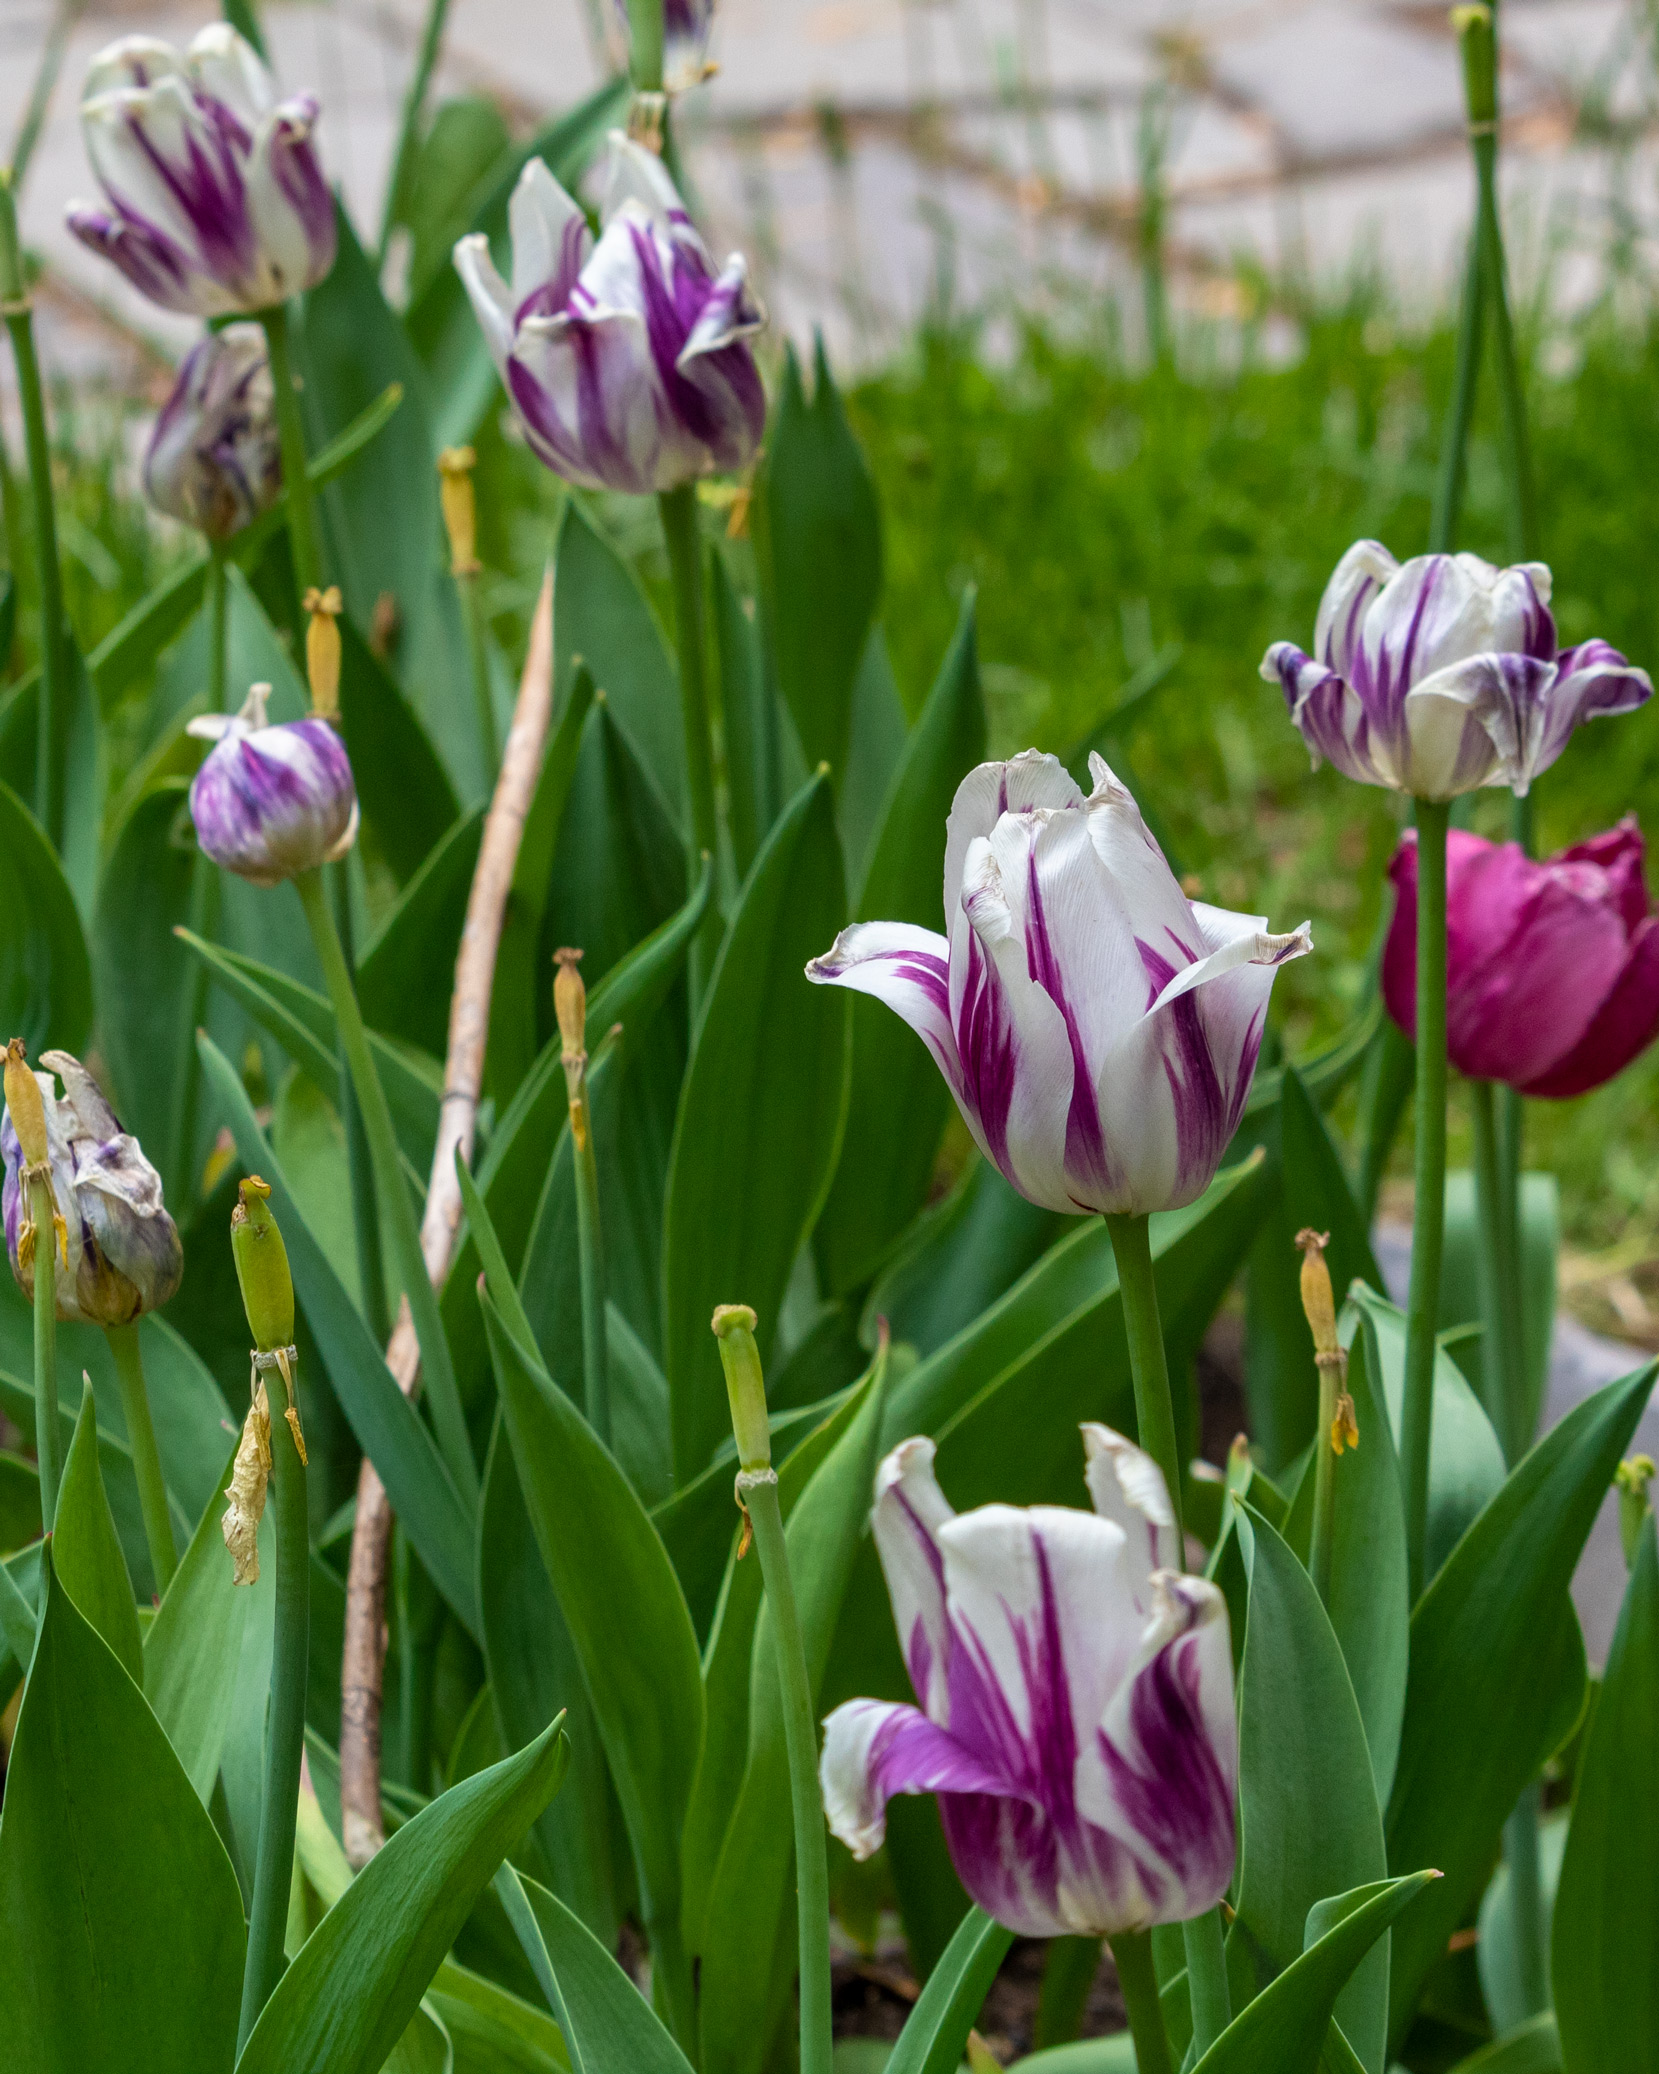 Several tulips, with purple and white patterns on the petals